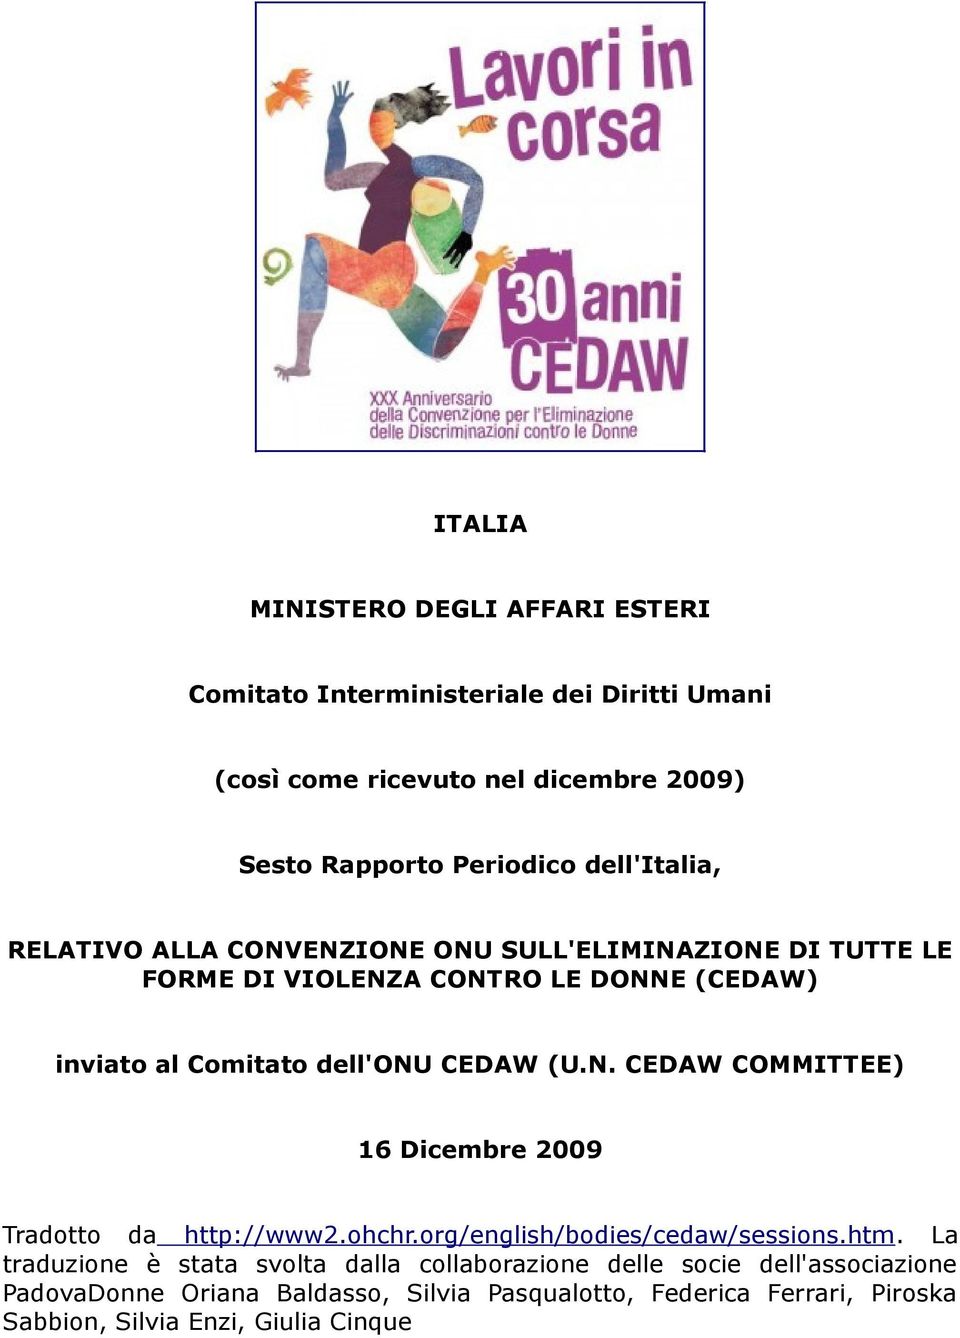 CEDAW (U.N. CEDAW COMMITTEE) 16 Dicembre 2009 Tradotto da http://www2.ohchr.org/english/bodies/cedaw/sessions.htm.